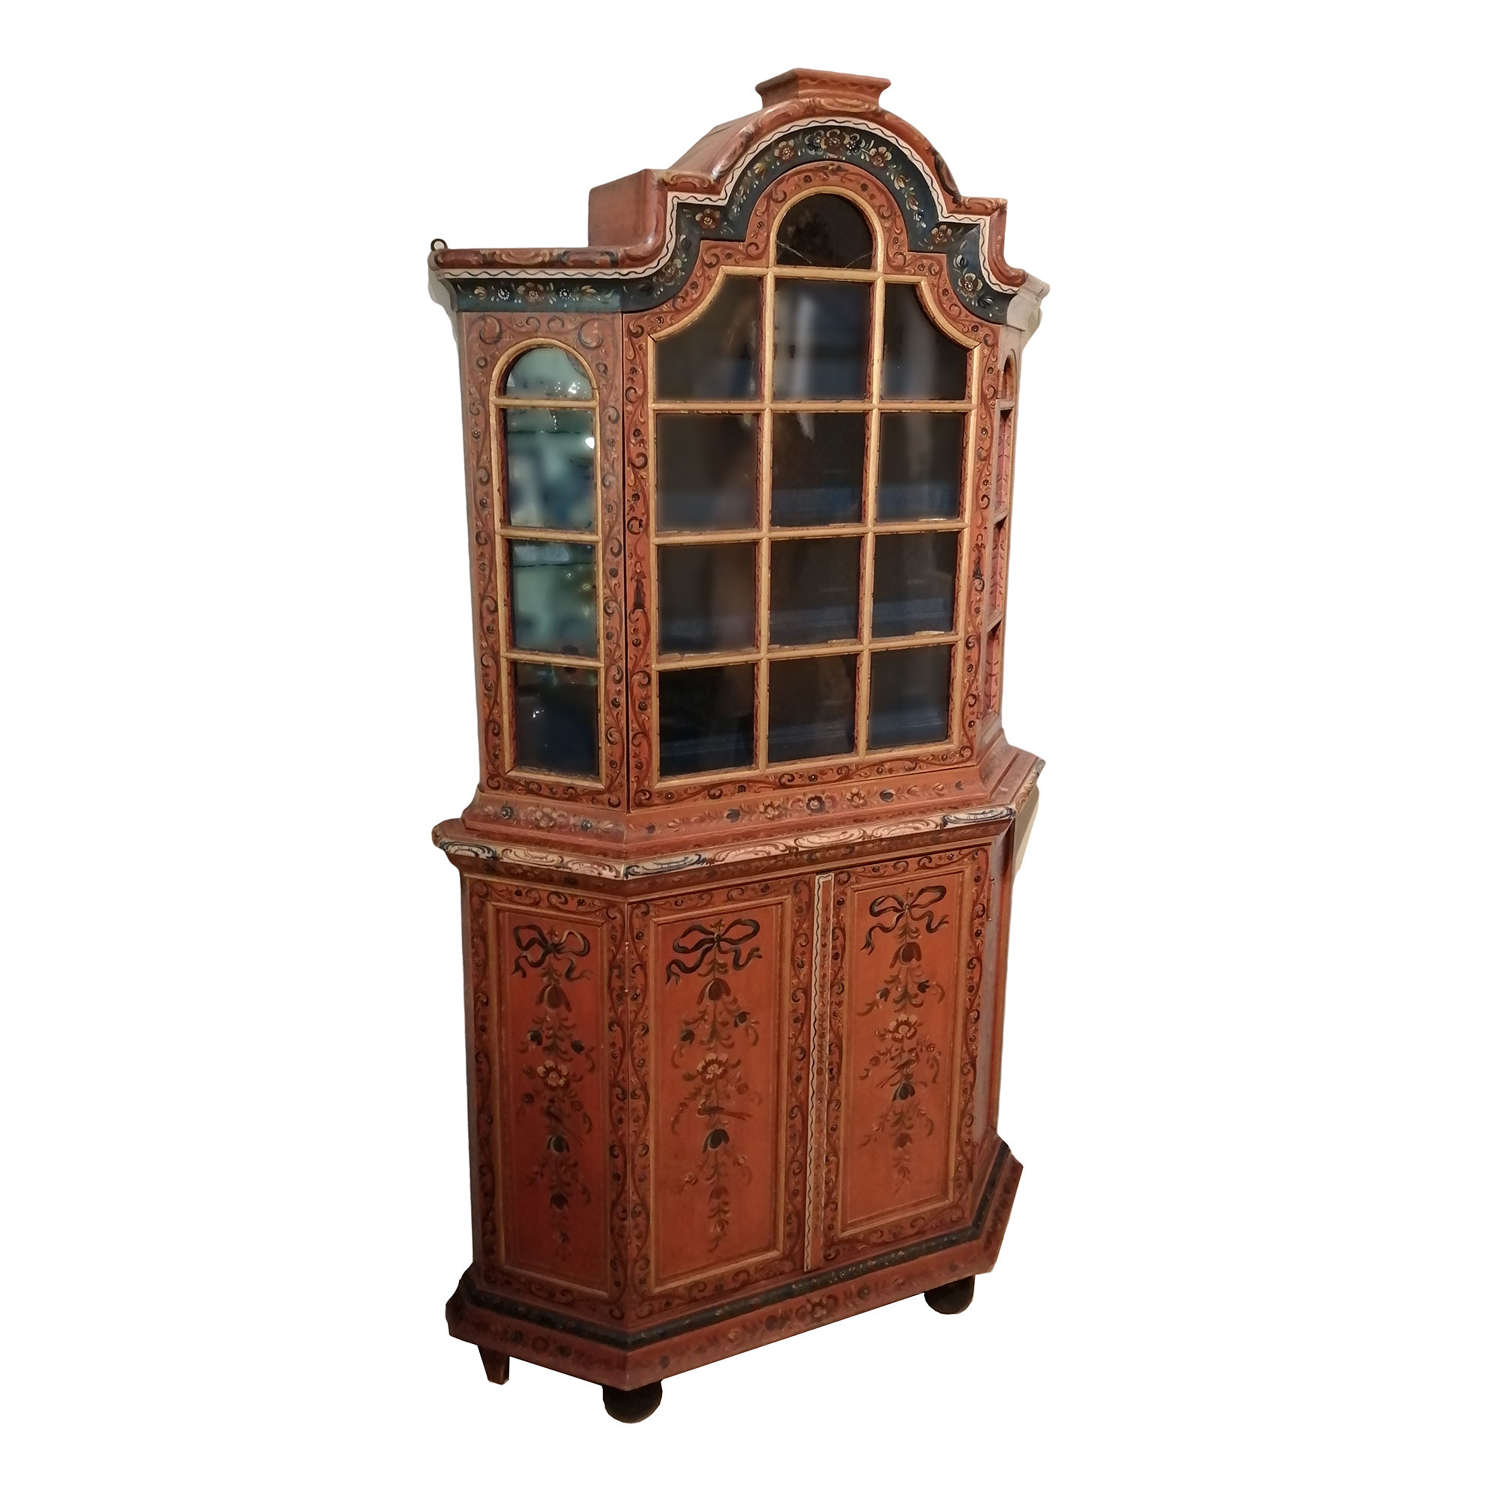 A Dutch painted display cabinet